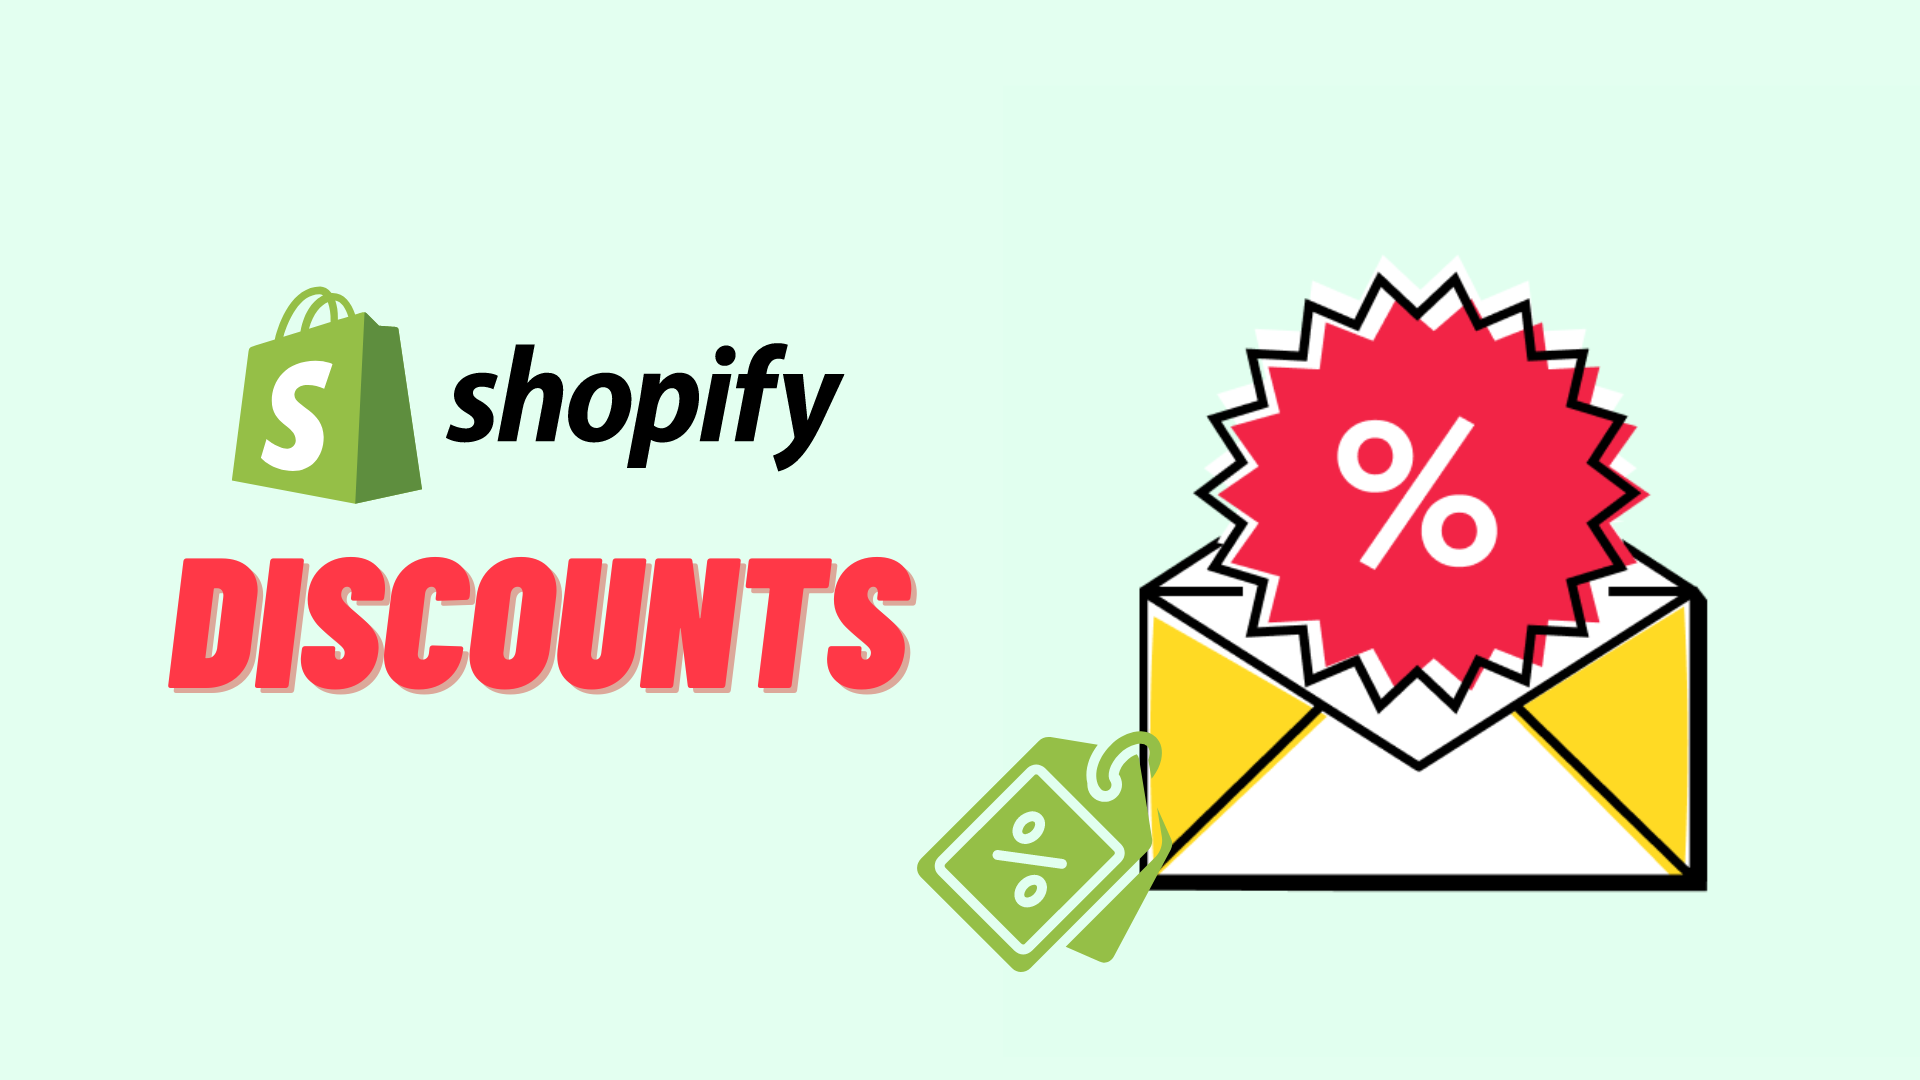 Shopify discounts: The robust marketing strategy to increase revenue for your online store